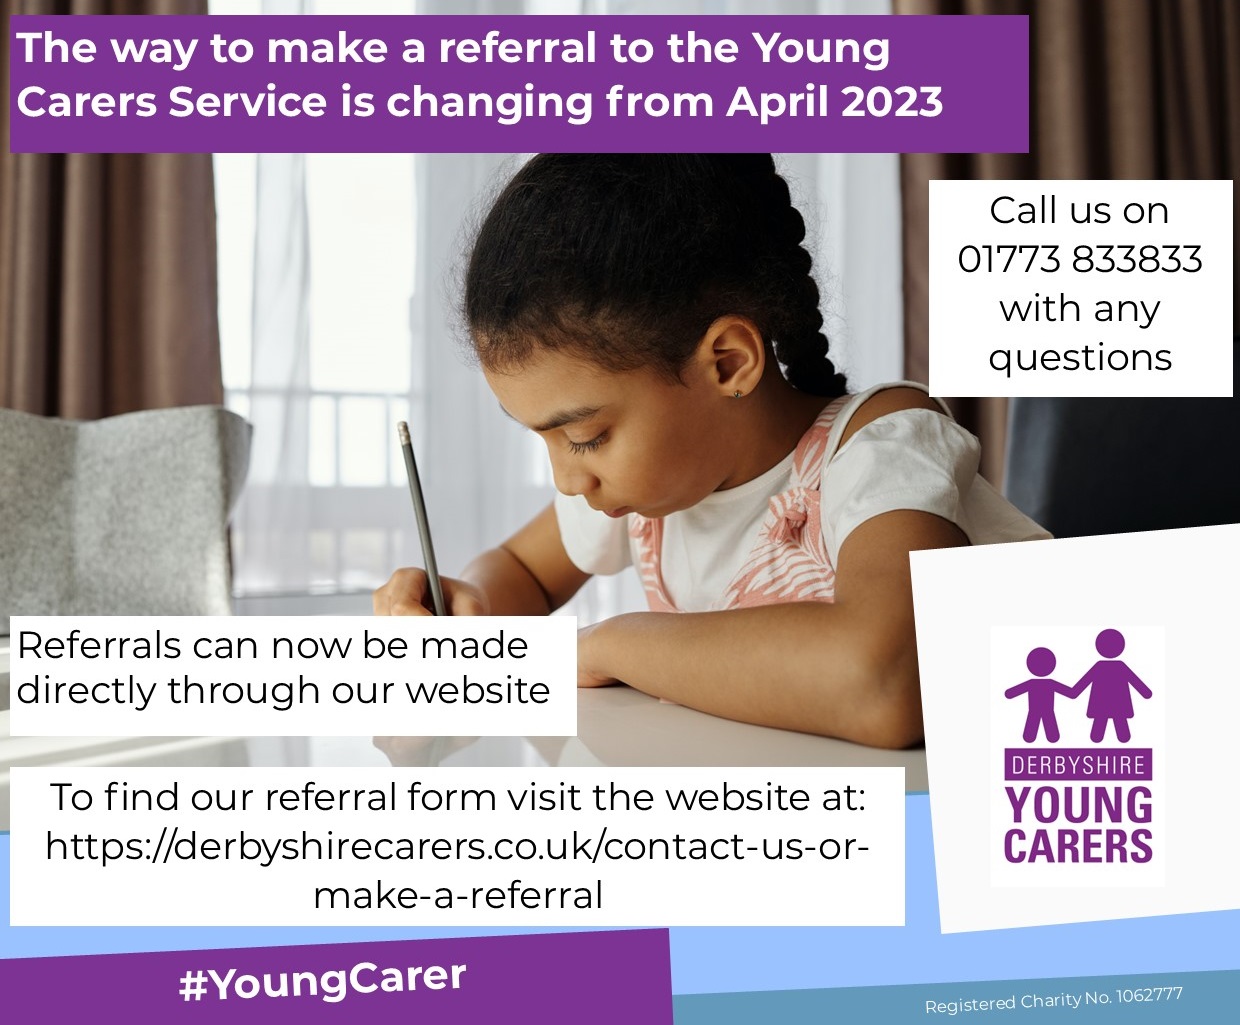 Young Carers Email change 2023.jpg (291 KB)